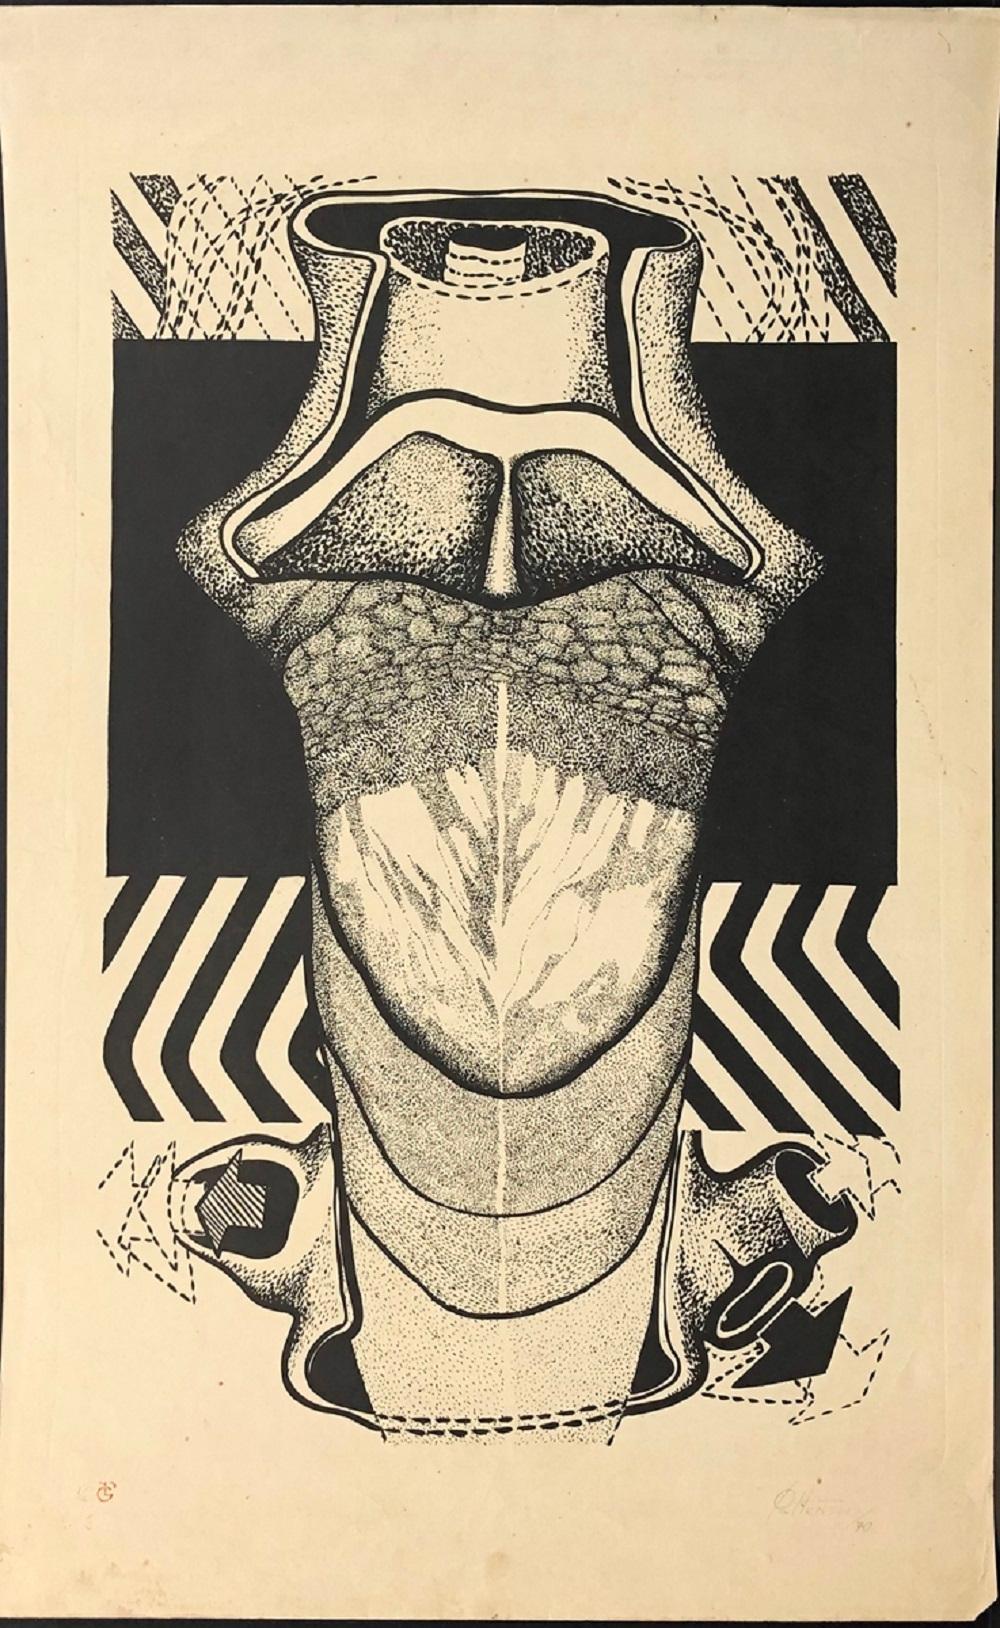 Oscar Patterson (Cuba, )
'Untitled', 1970
lithograph on paper Canson 320 g.
30 x 18.8 in. (76 x 47.5 cm.)
Edition of 6
ID: PAT-301
Hand-signed by author